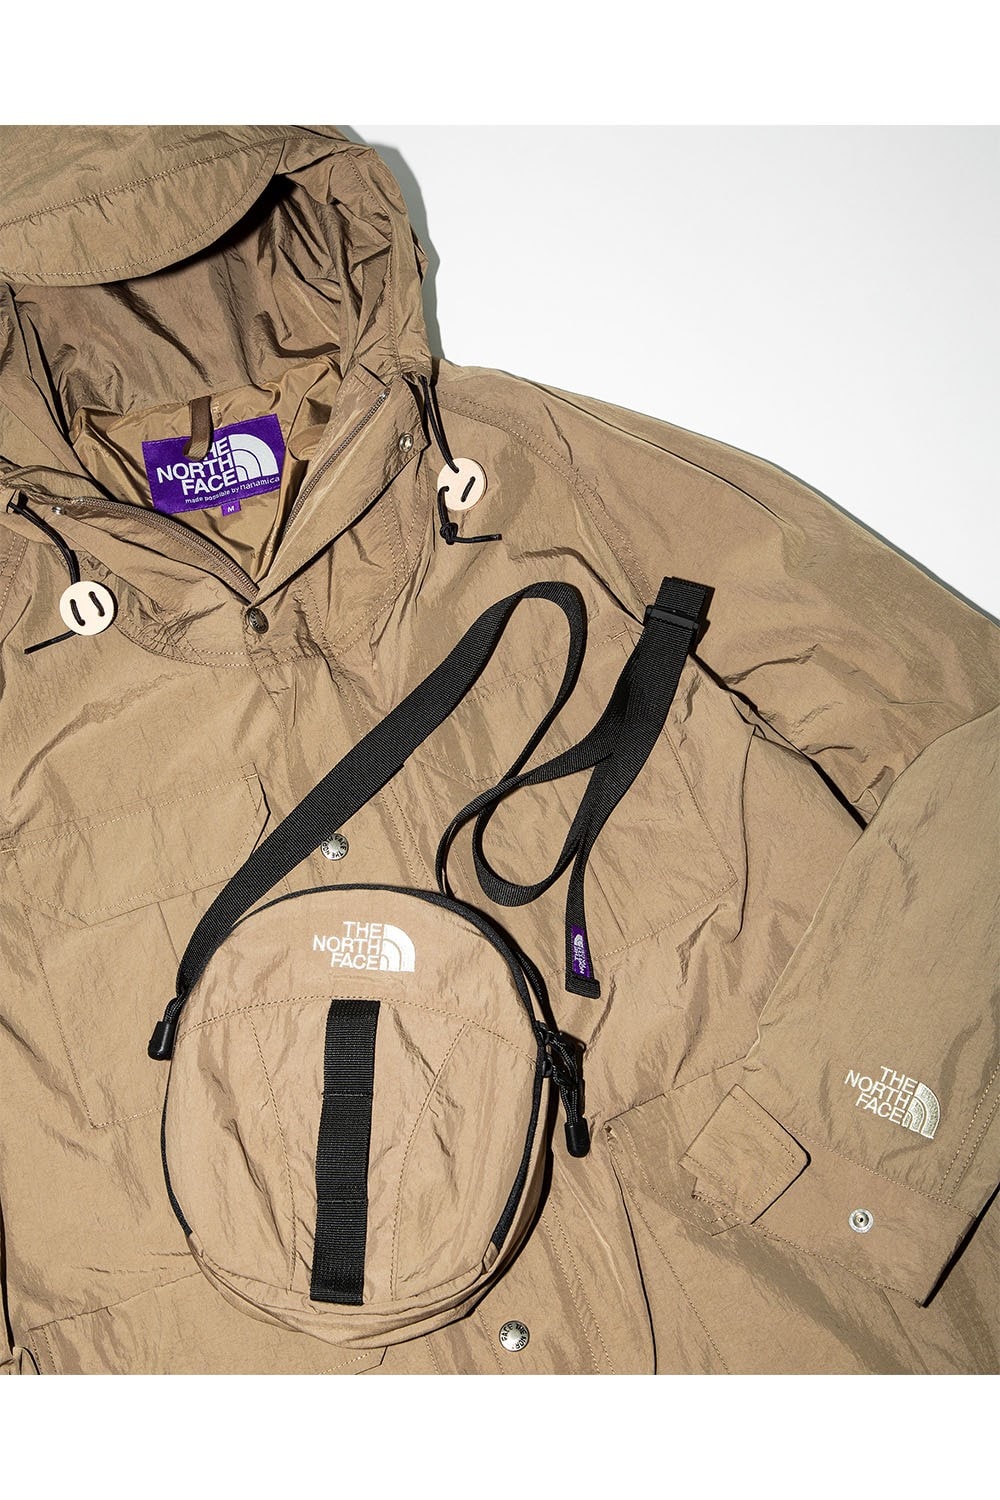 BEAUTY & YOUTH 推出兩款 The North Face Purple Label 全新單品